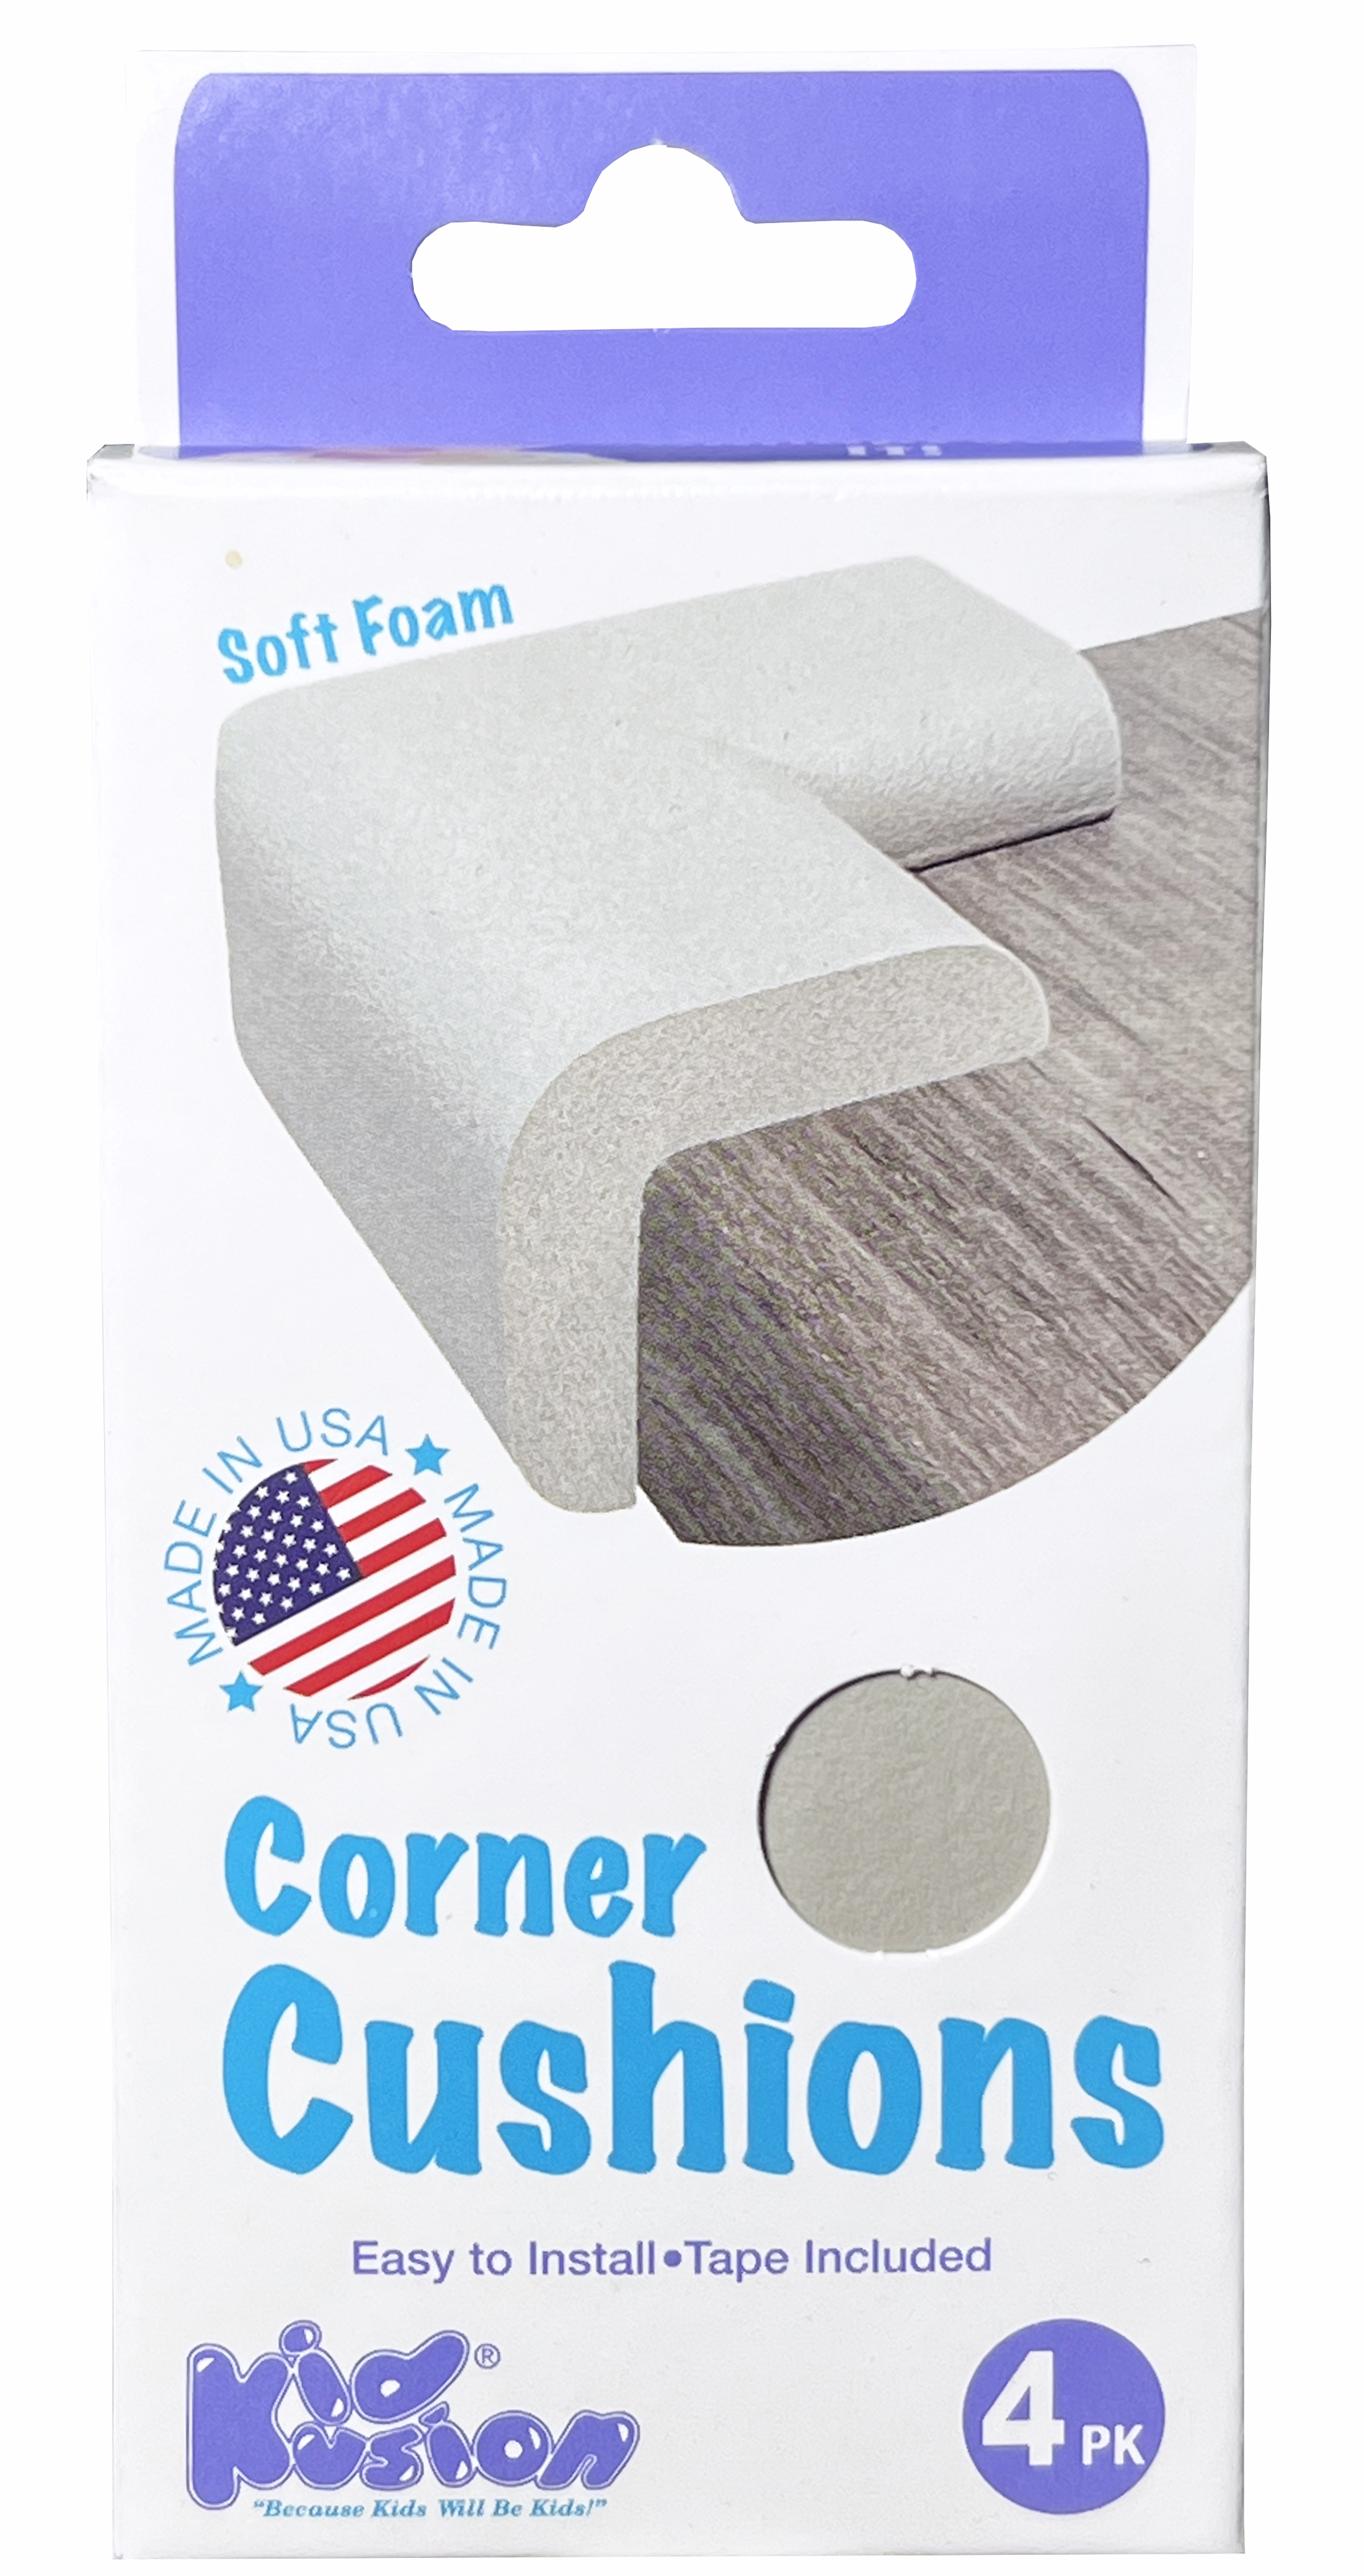 KidKusion Baby Proofing Foam Rubber Corner Cushions,Gray, Corner Protector for Tables, Furniture and more, 4.0 CT - image 5 of 8